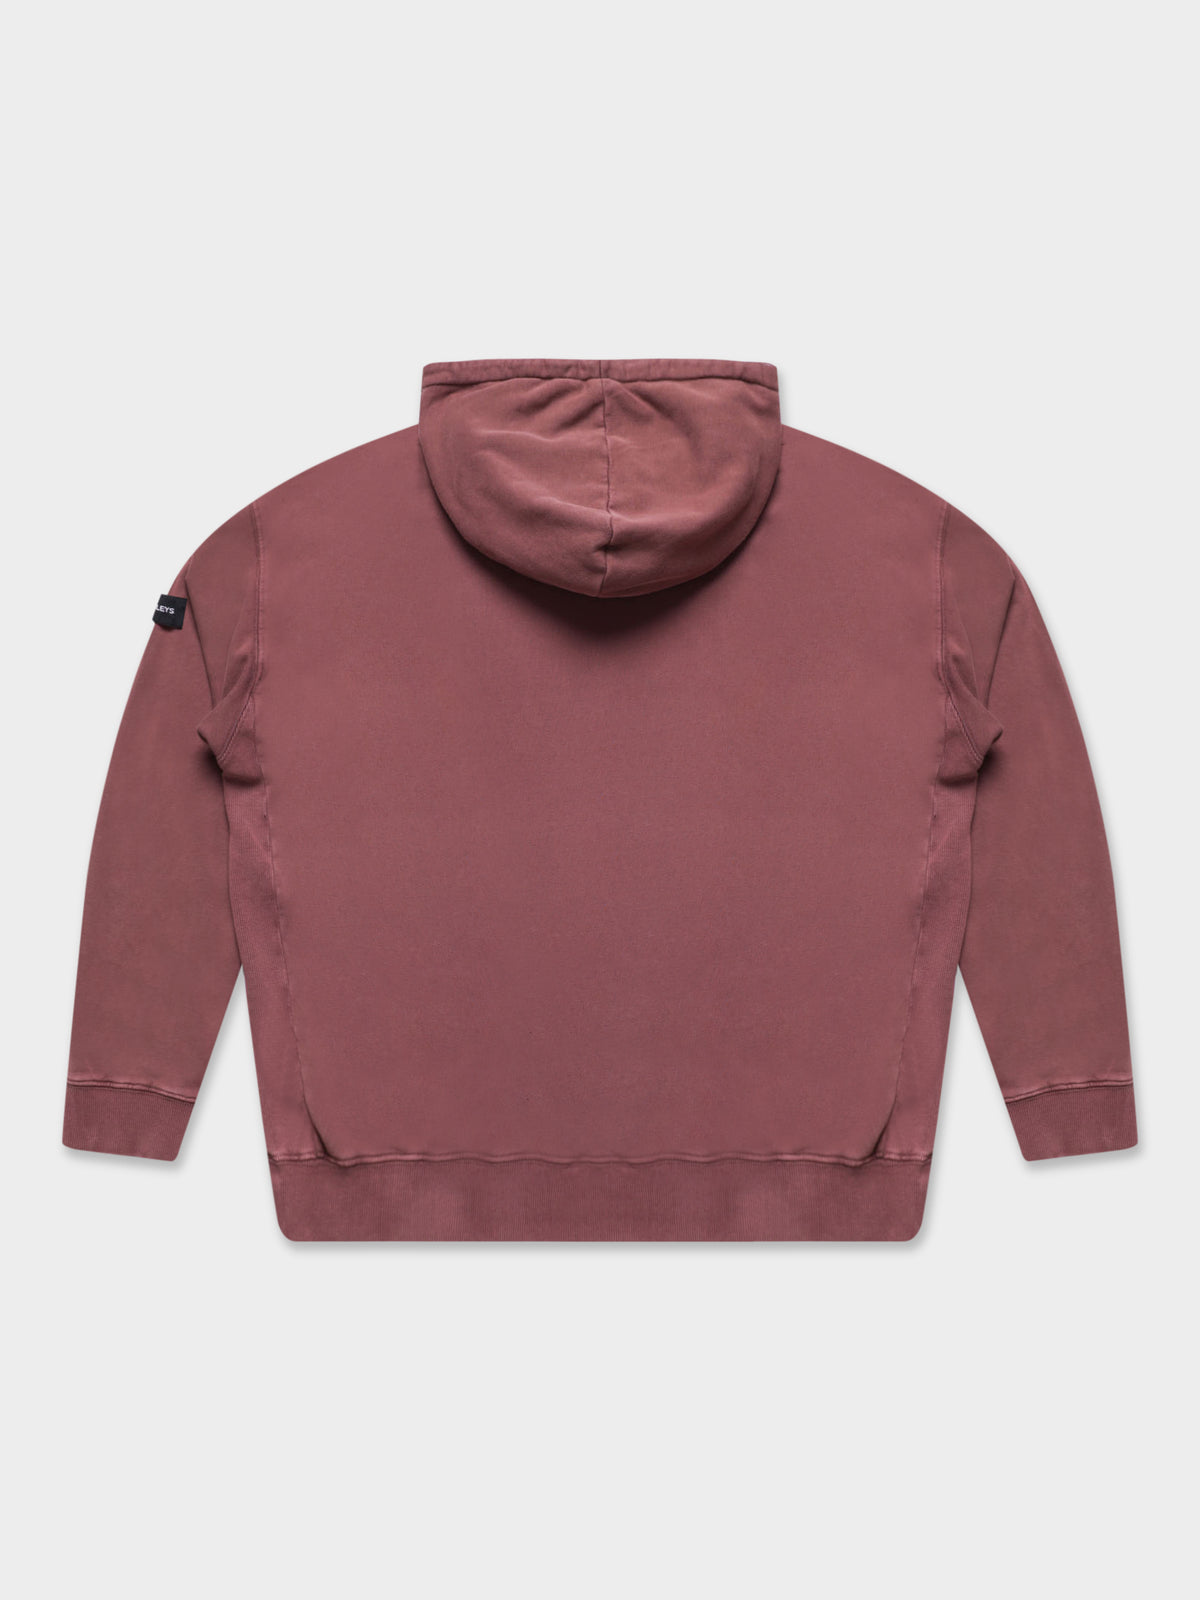 Formation Acid Hood Sweater in Aubergine Red